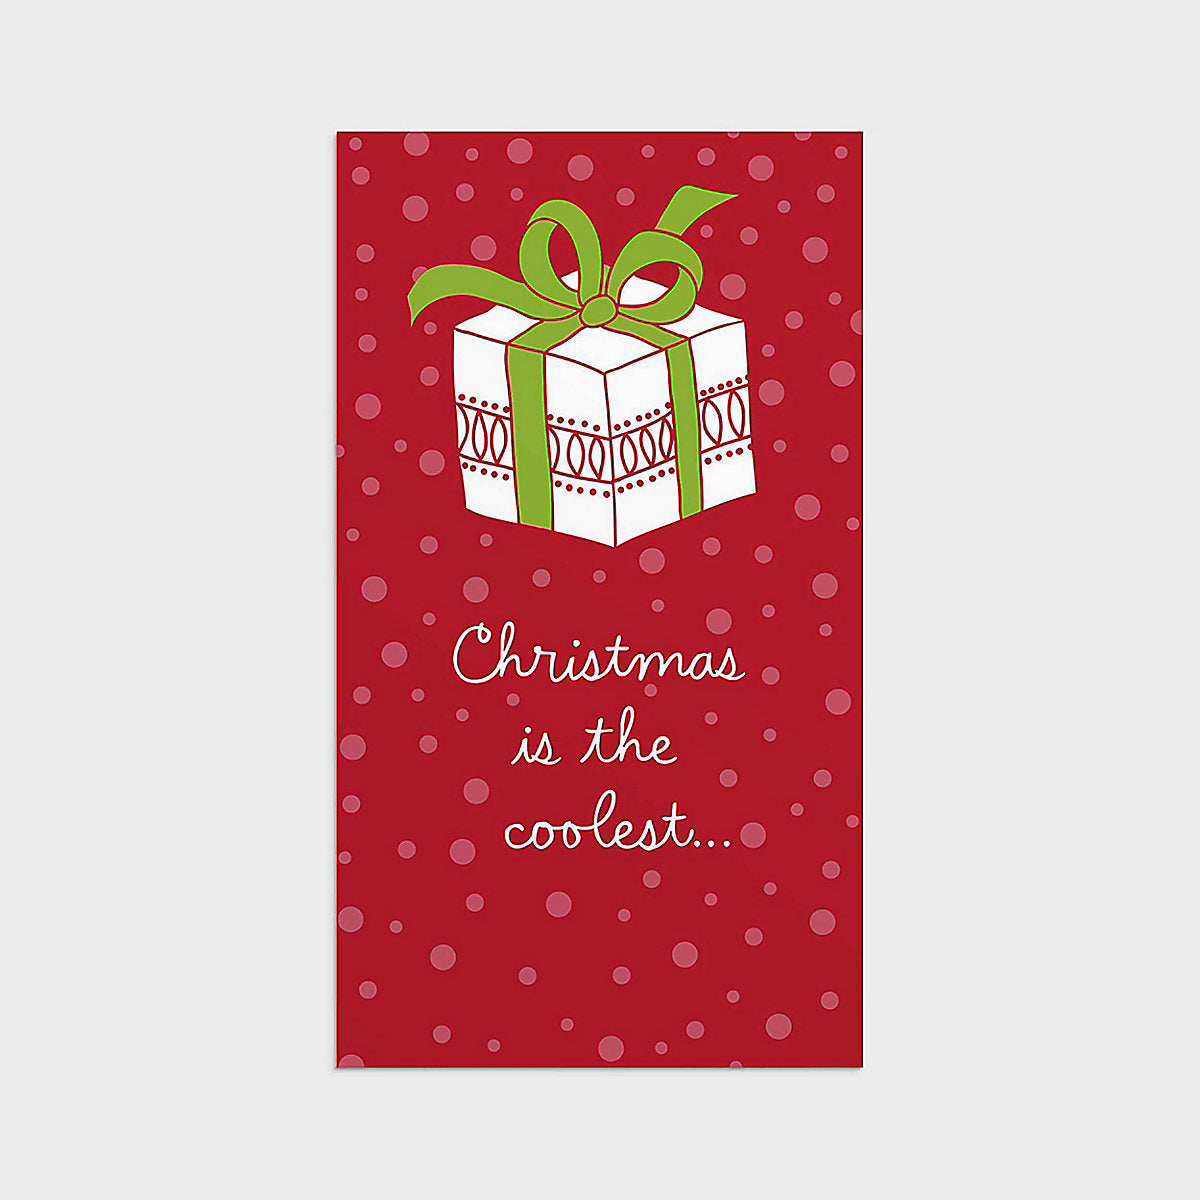 Little Inspirations Christmas Cards - Christmas Is The Coolest (16 cards) - The Christian Gift Company